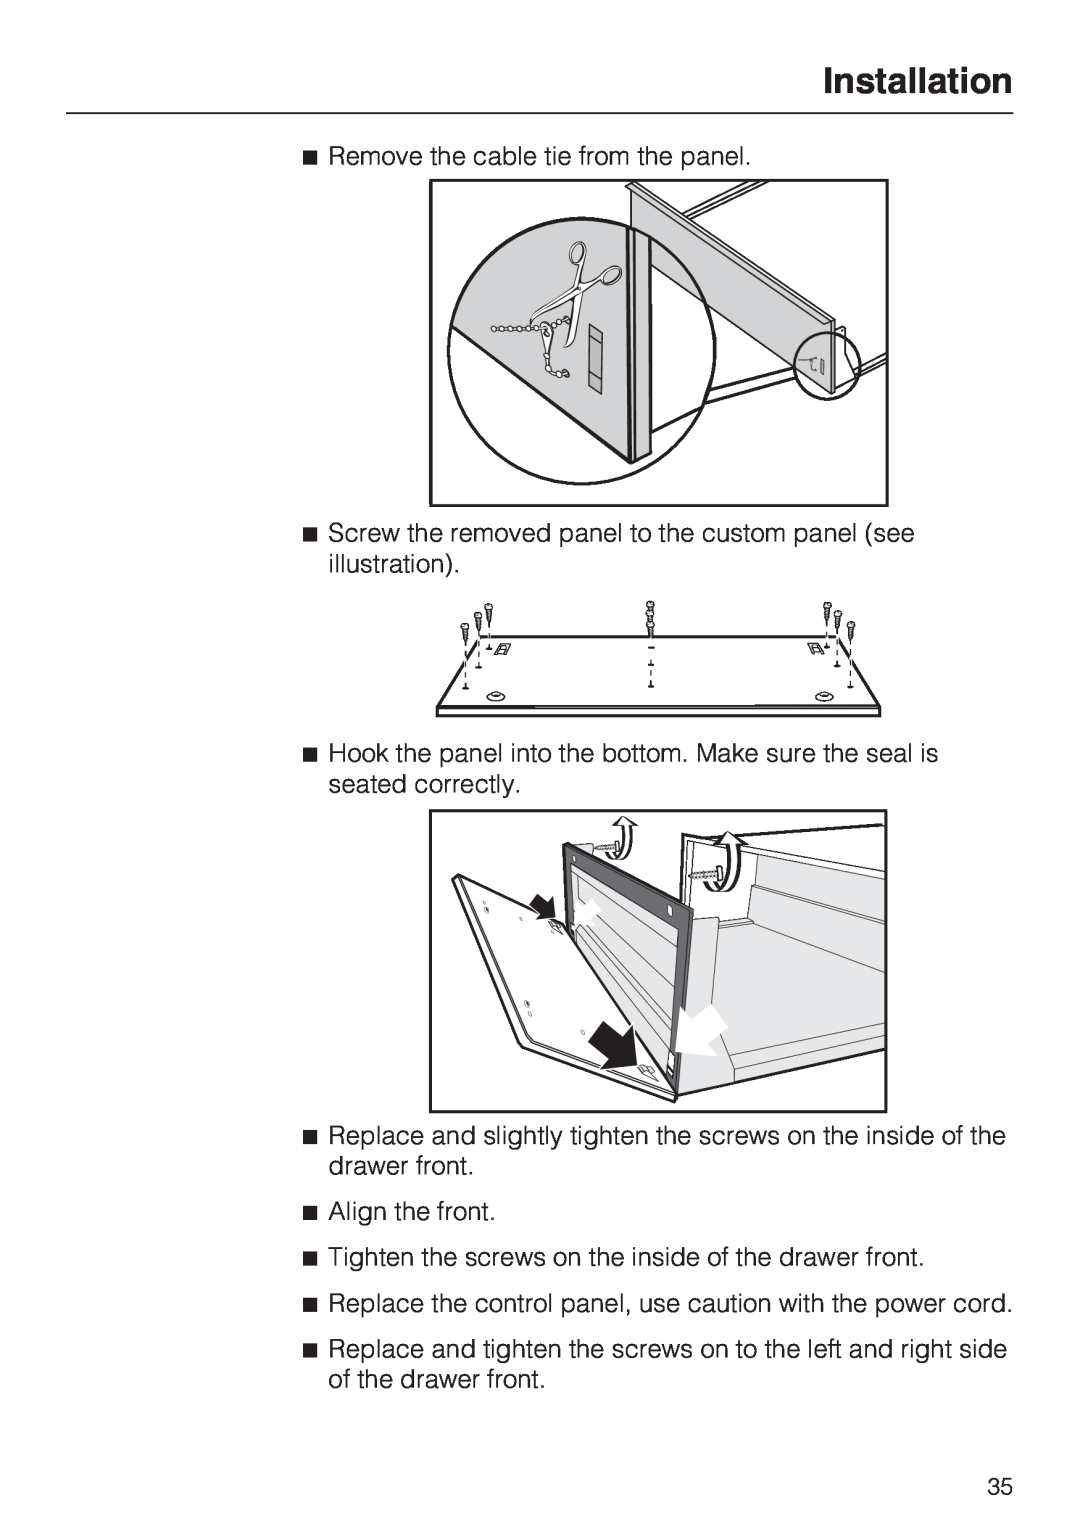 Miele ESW 4088-14, ESW 48X2, ESW4082-14, ESW 47X2 installation instructions Installation, Remove the cable tie from the panel 